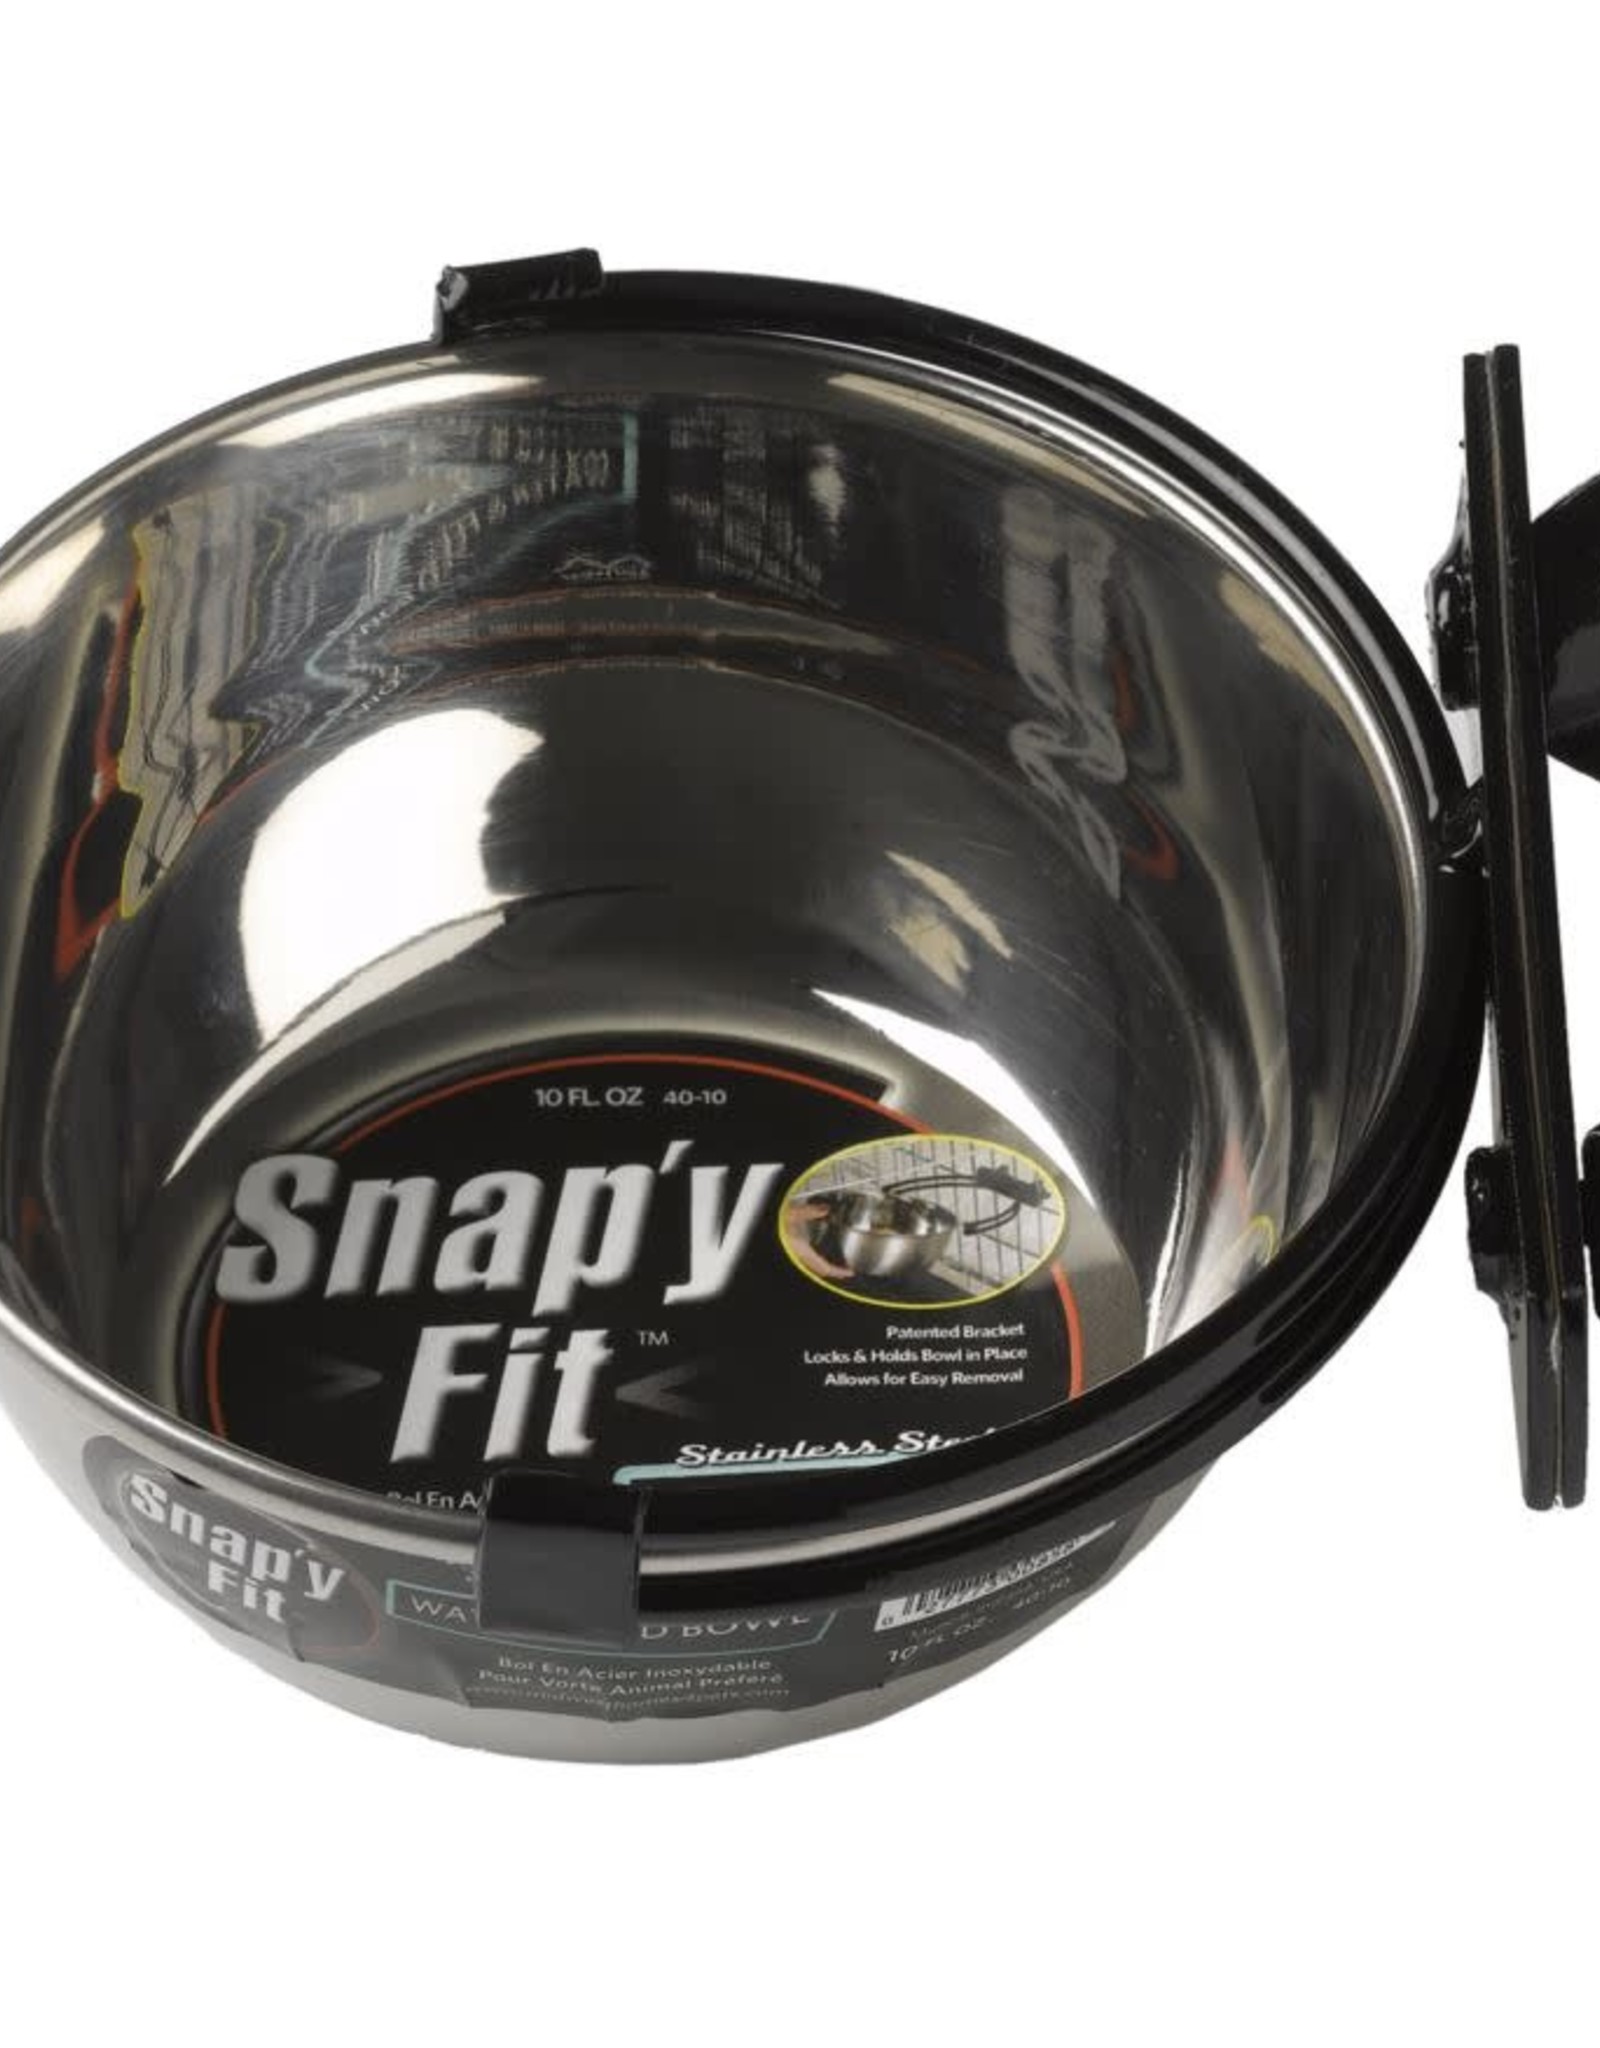 MidWest Homes for Pets Midwest Snap'y Fit Water & Food Bowl